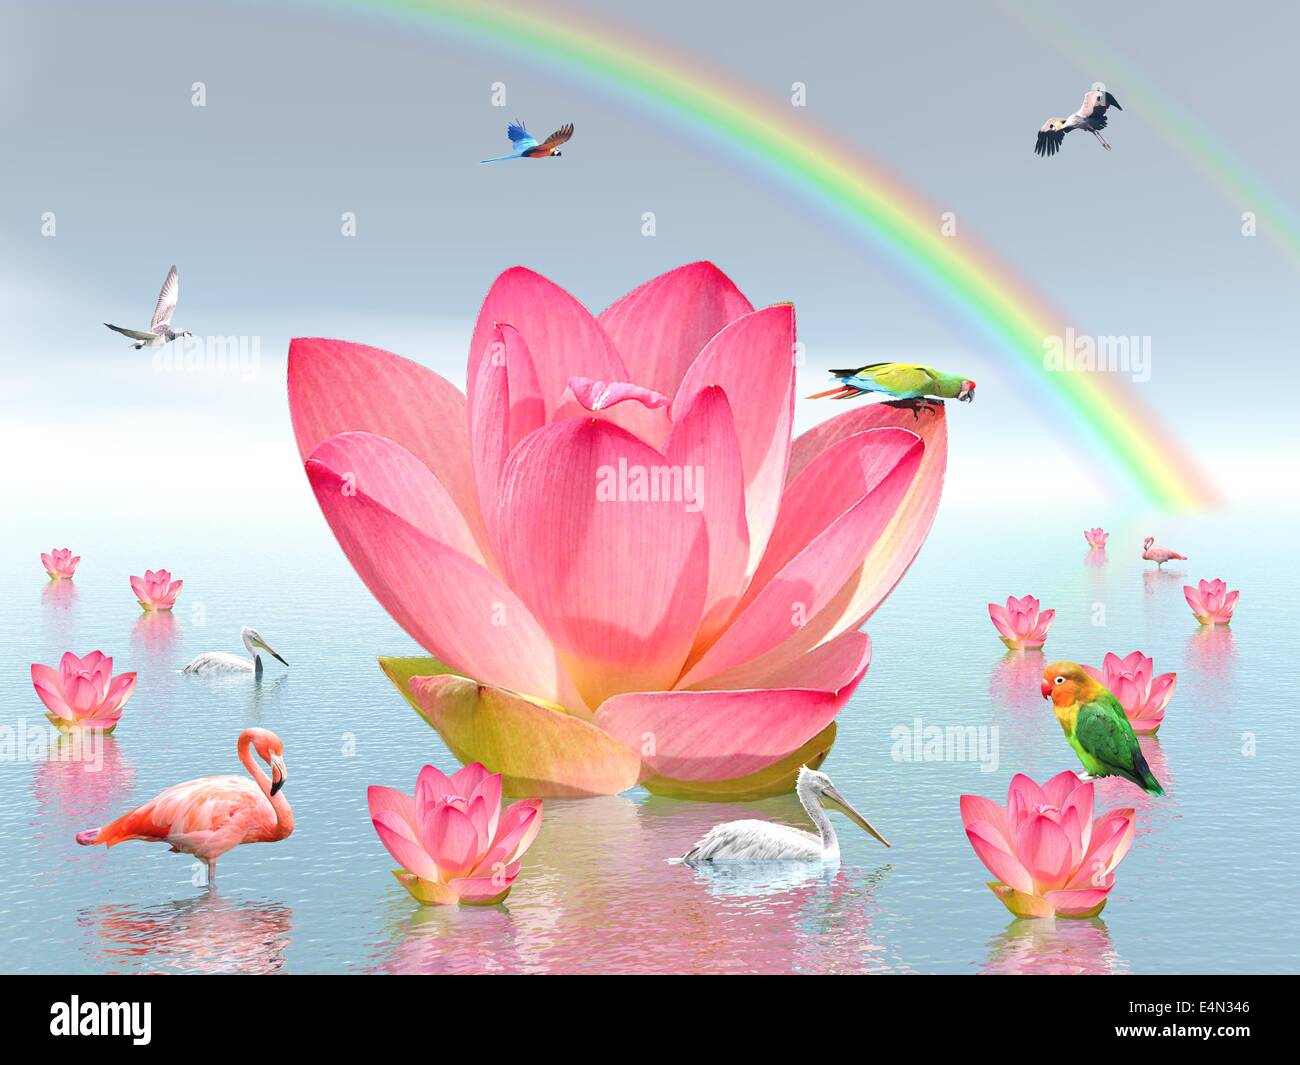 Lily flowers and birds  under rainbow Stock Photo